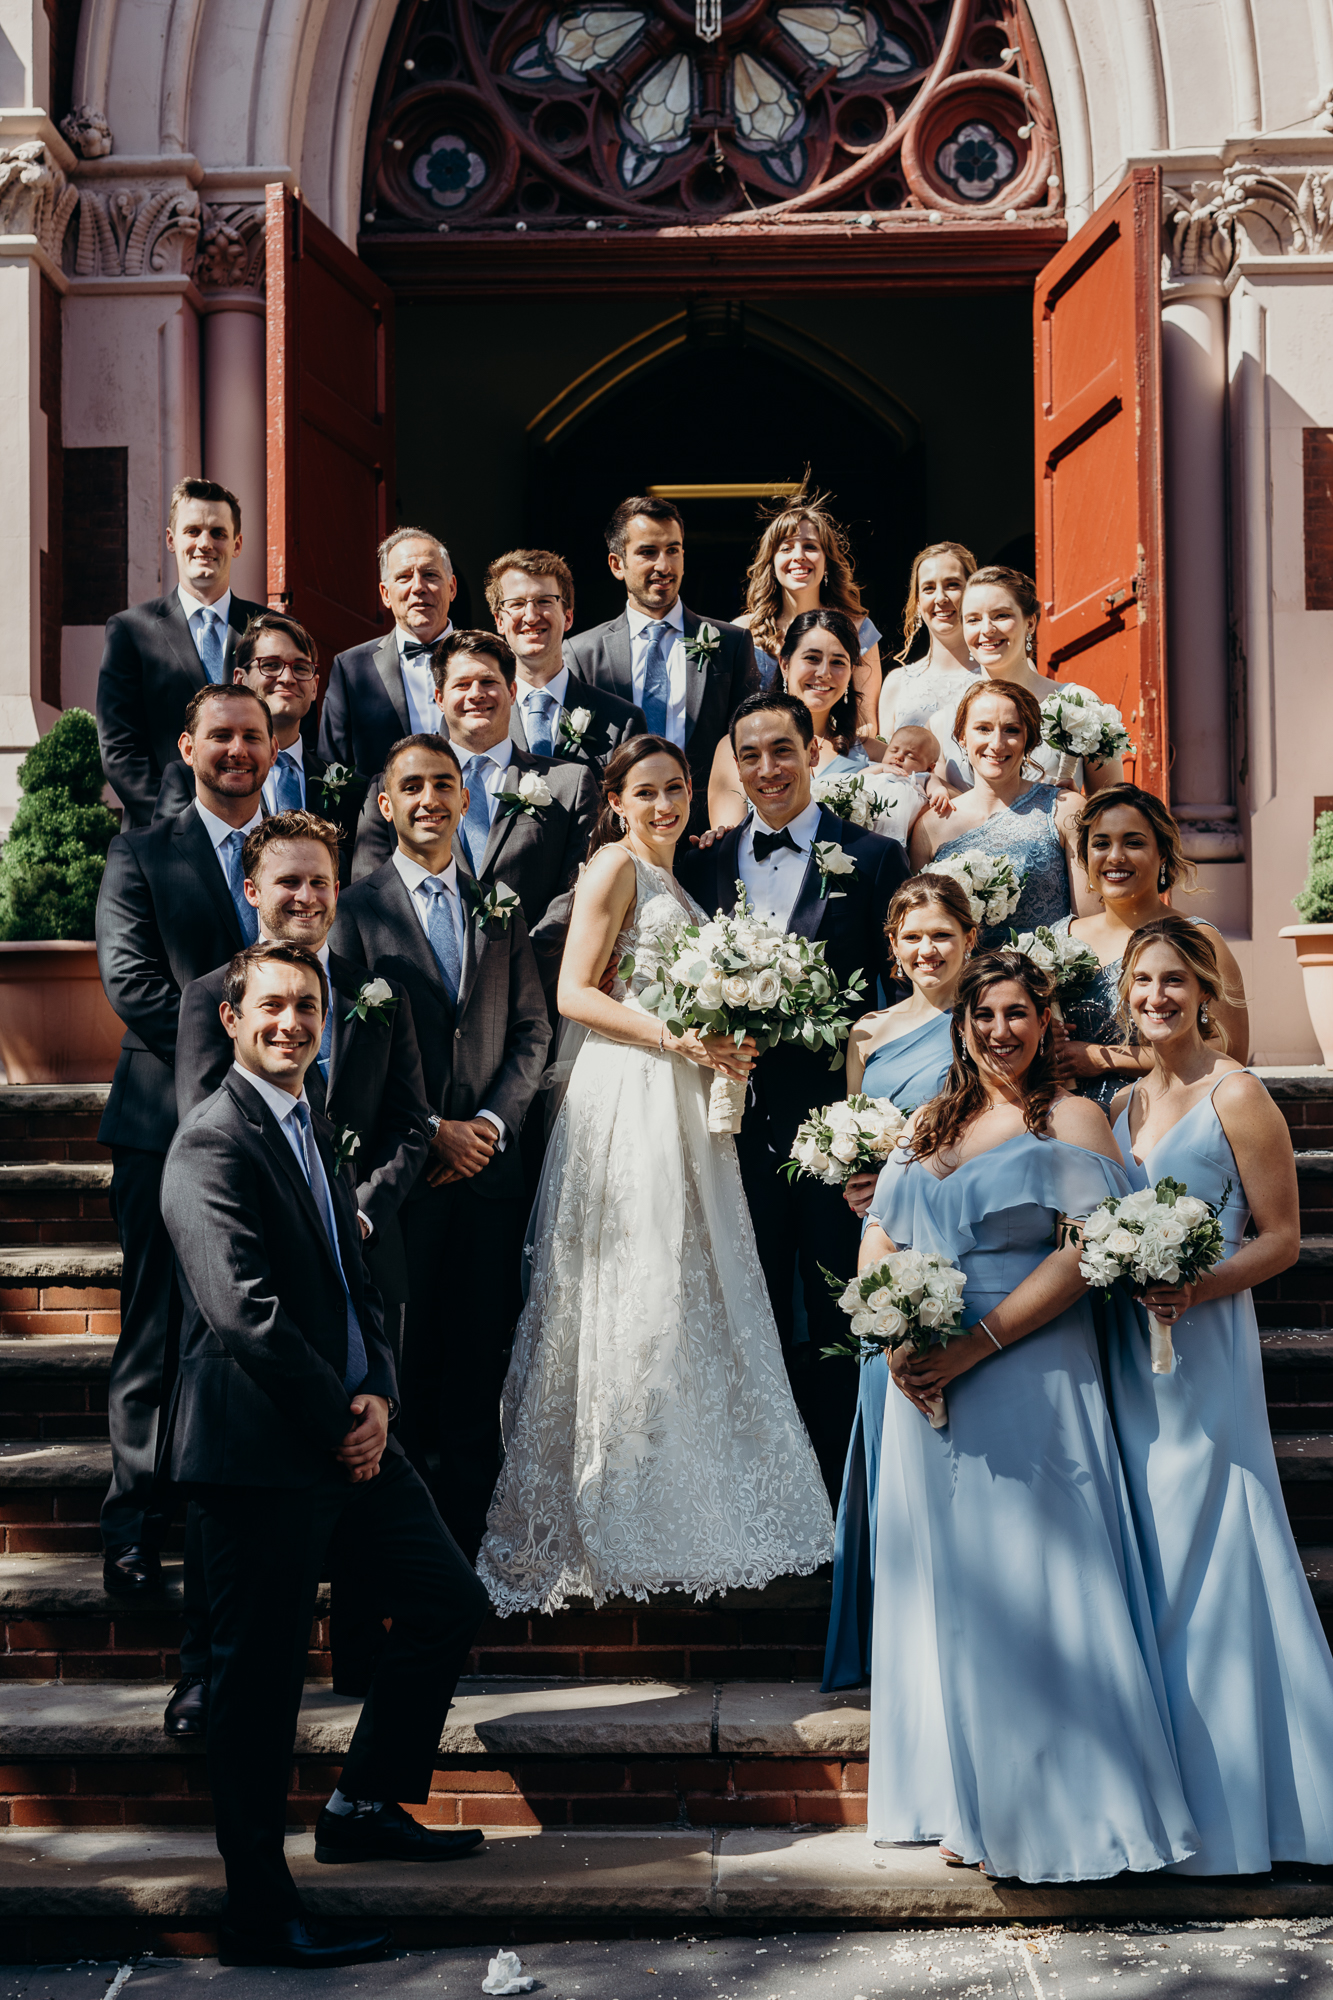 a portrait of a wedding party at a church in brooklyn, new york city